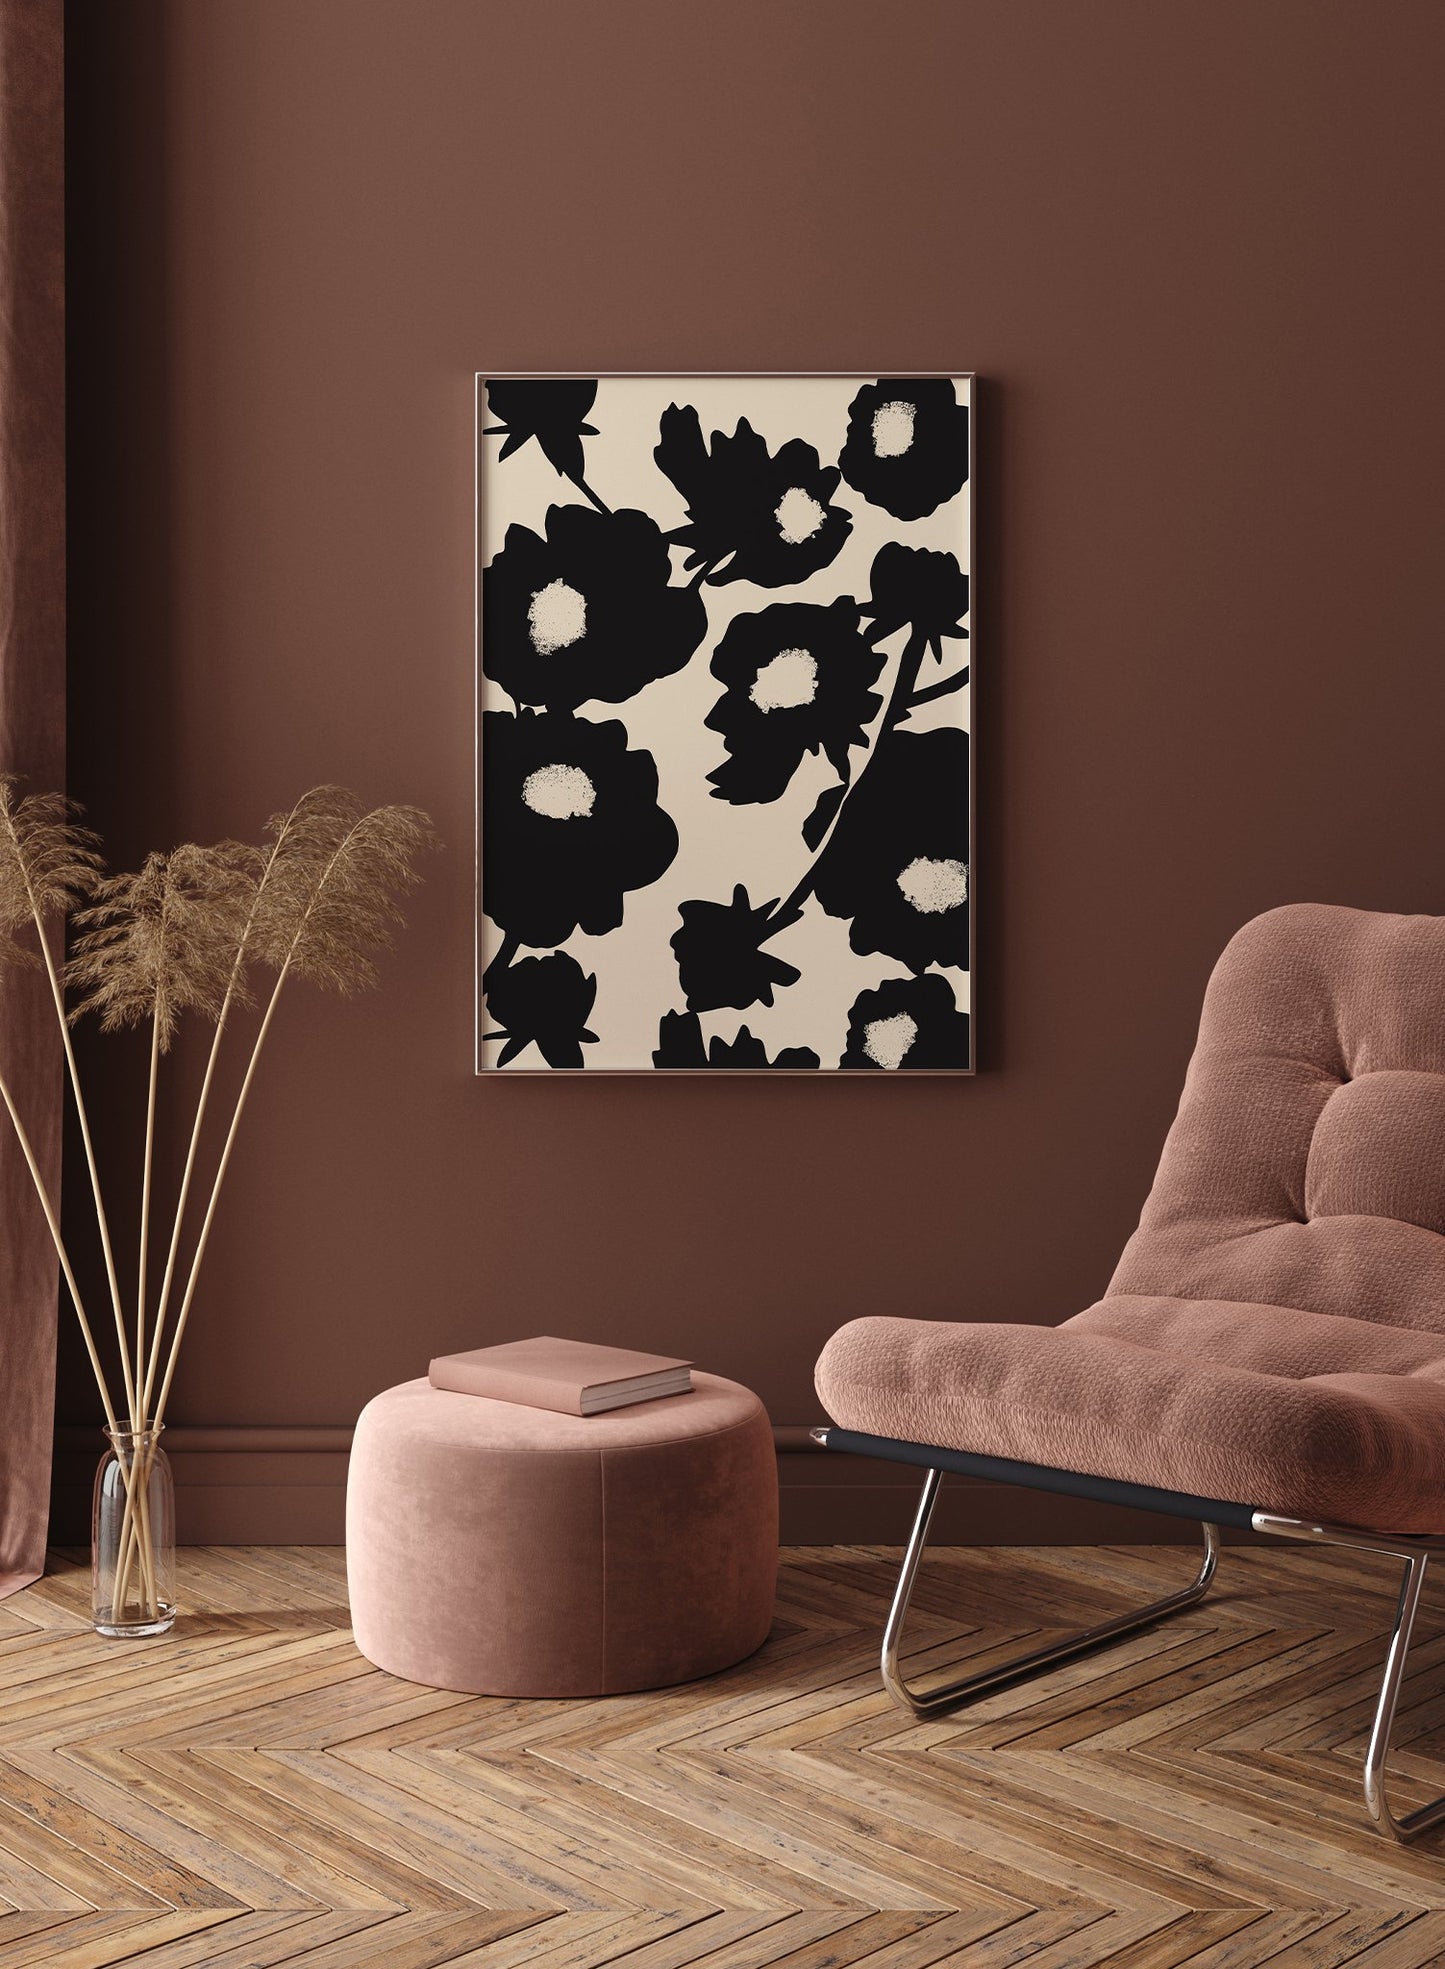 "Flower Bush" is a minimalist illustration poster by Opposite Wall in black and beige of abstract branch inspired by French painter Henri Matisse.